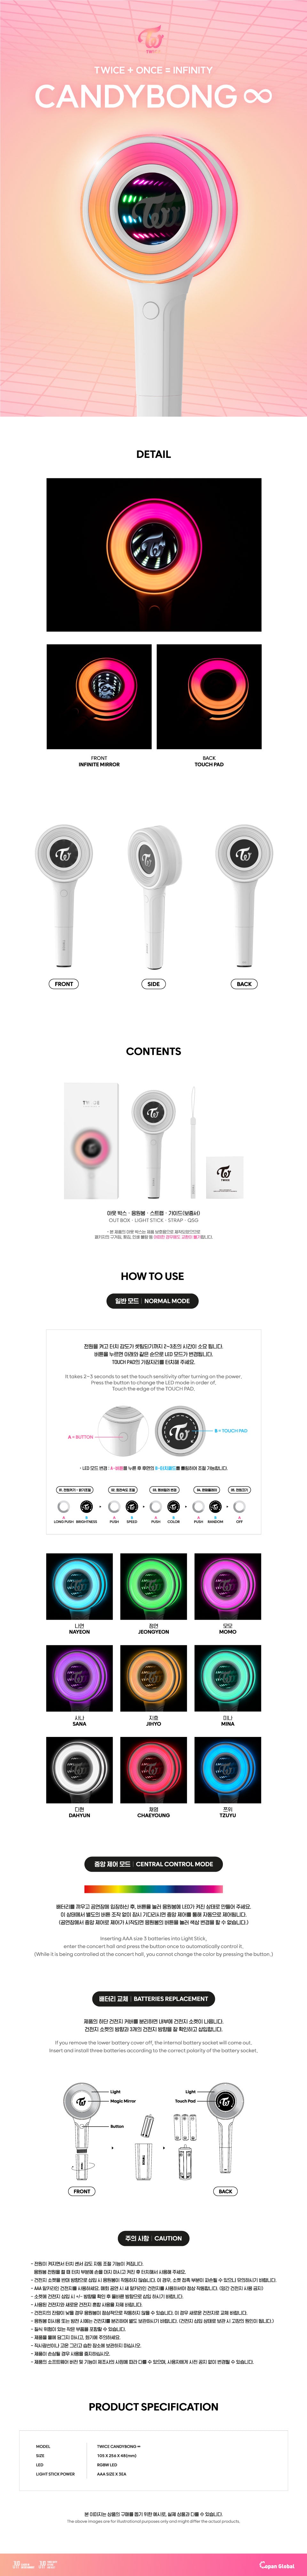 Twice Official Lightstick : CandyBong ∞